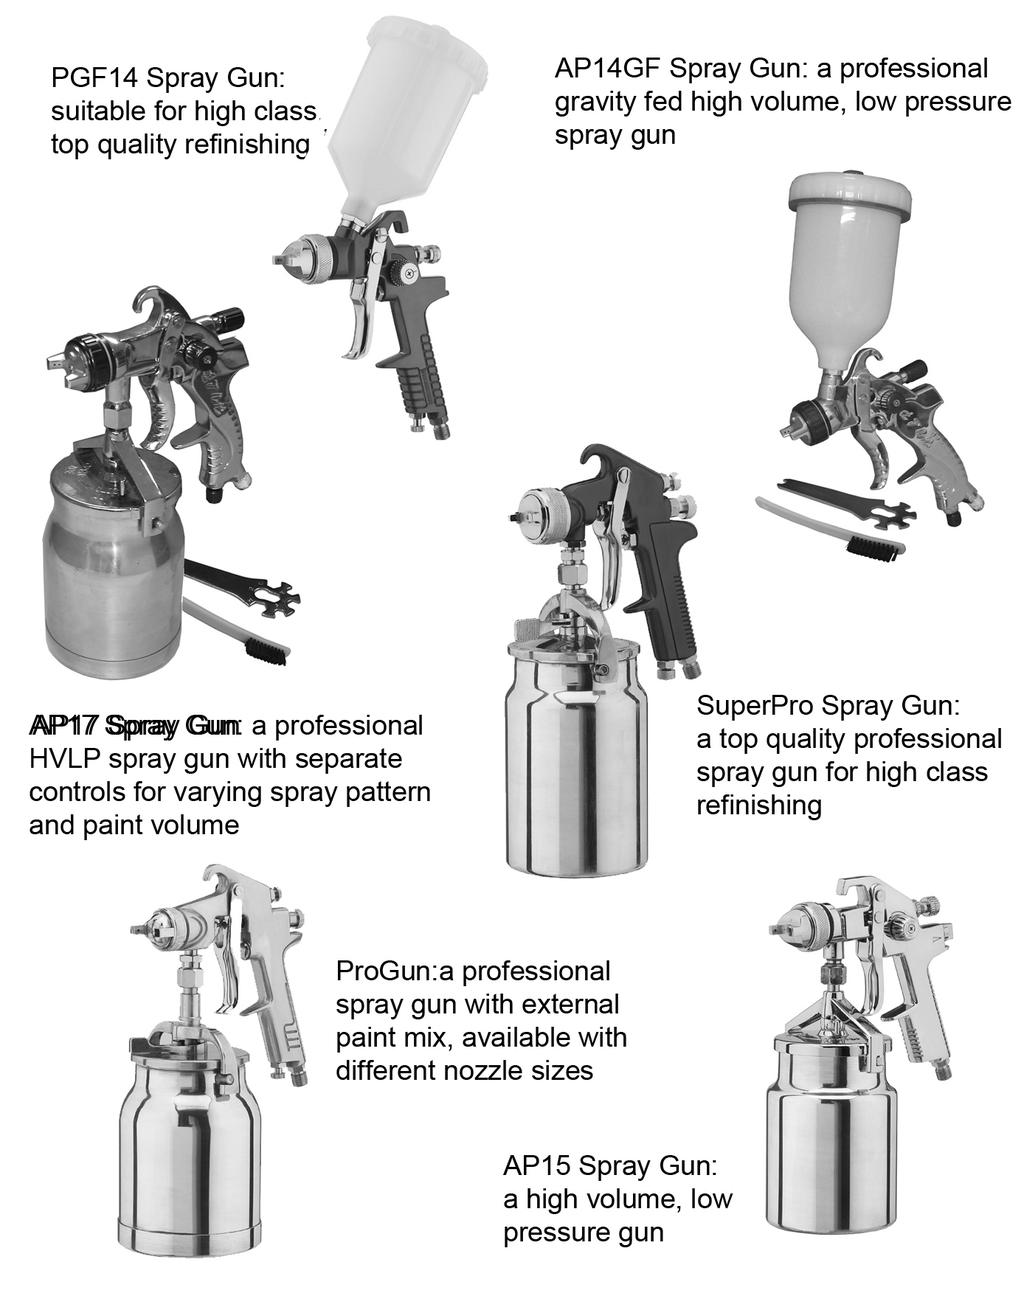 CLARKE SPRAY GUNS A wide variety of Clarke spray guns can be used with